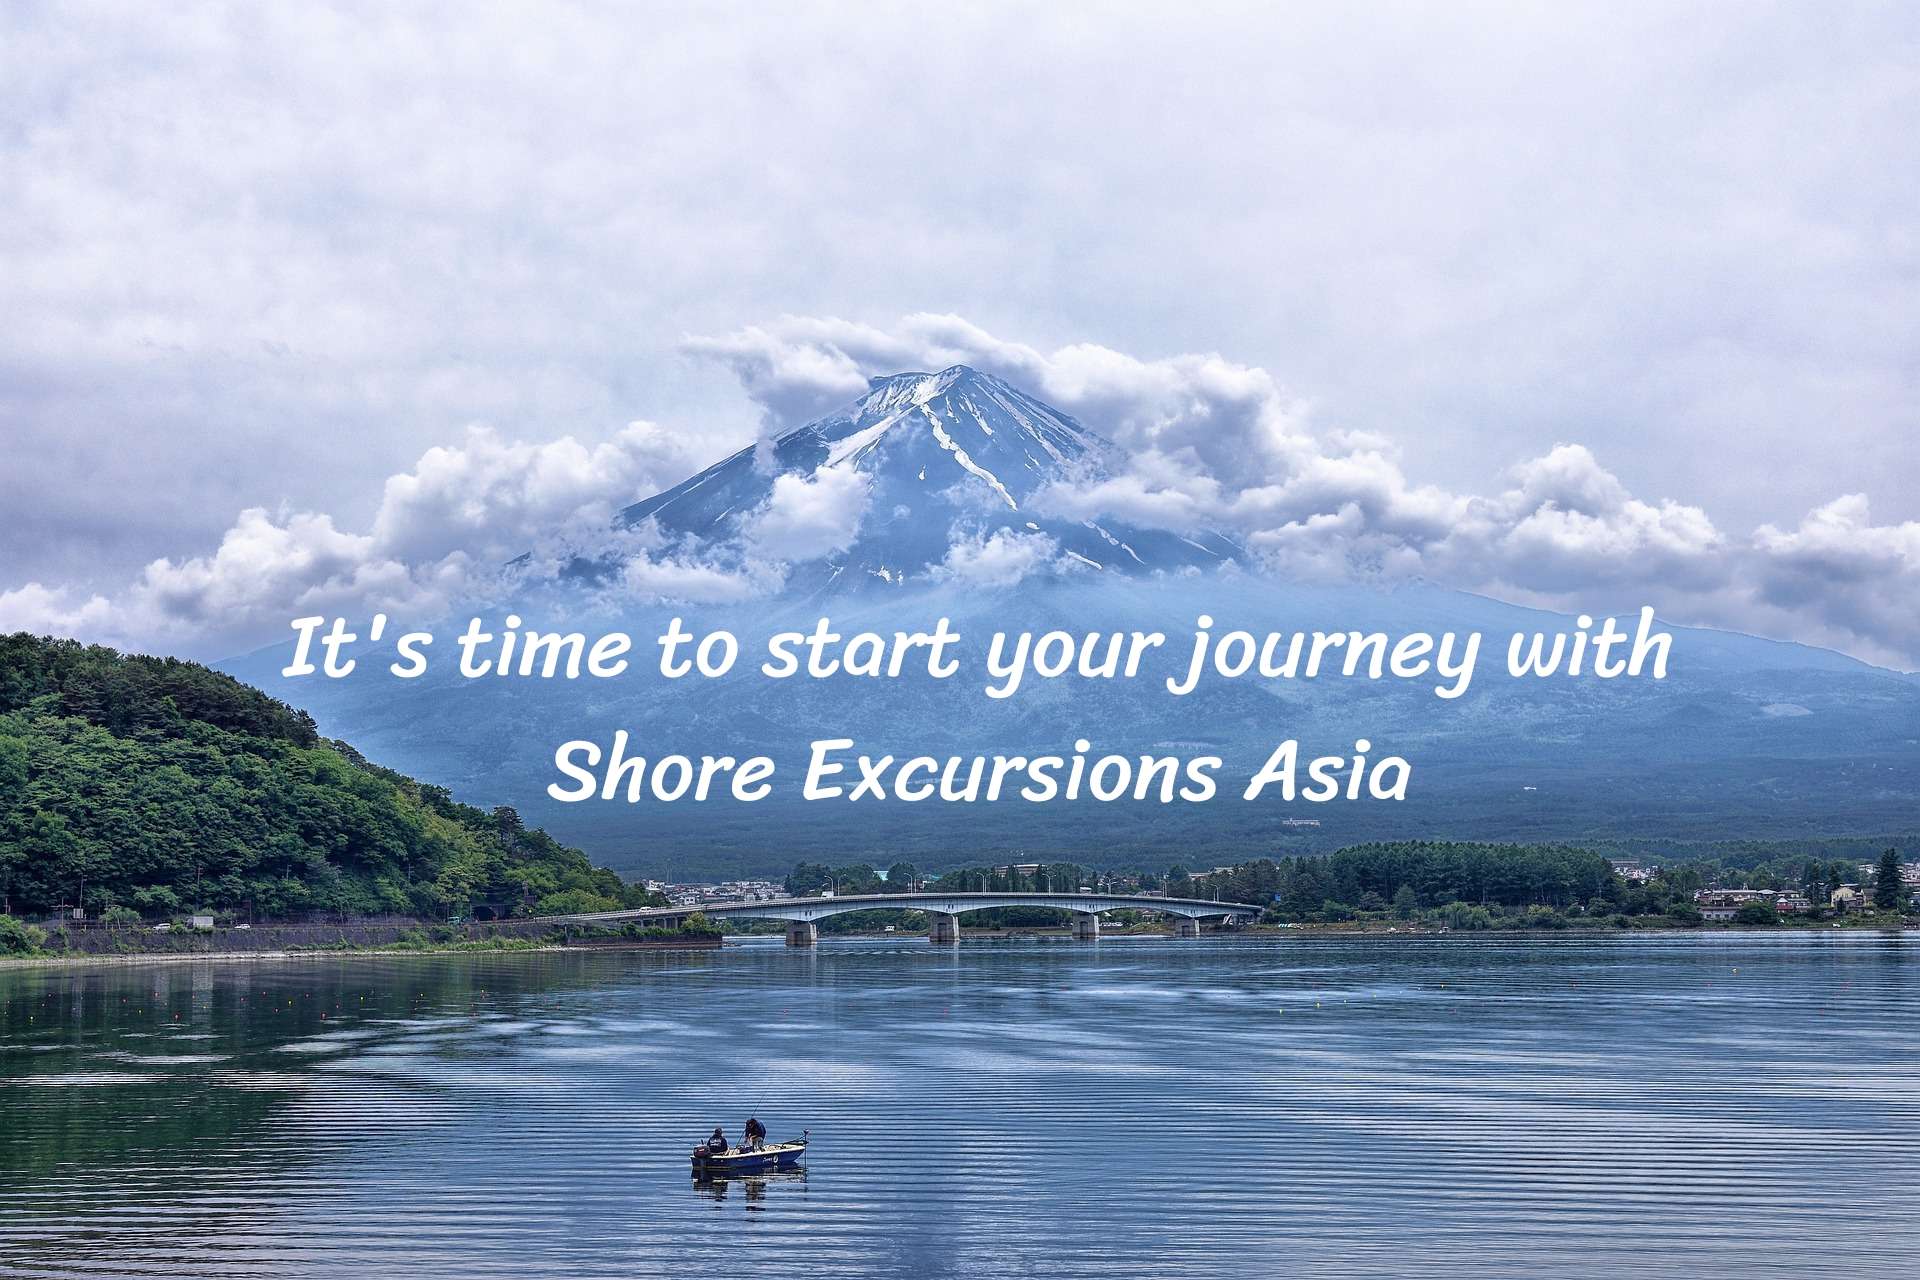 Create your trip with Shore Excursions Asia